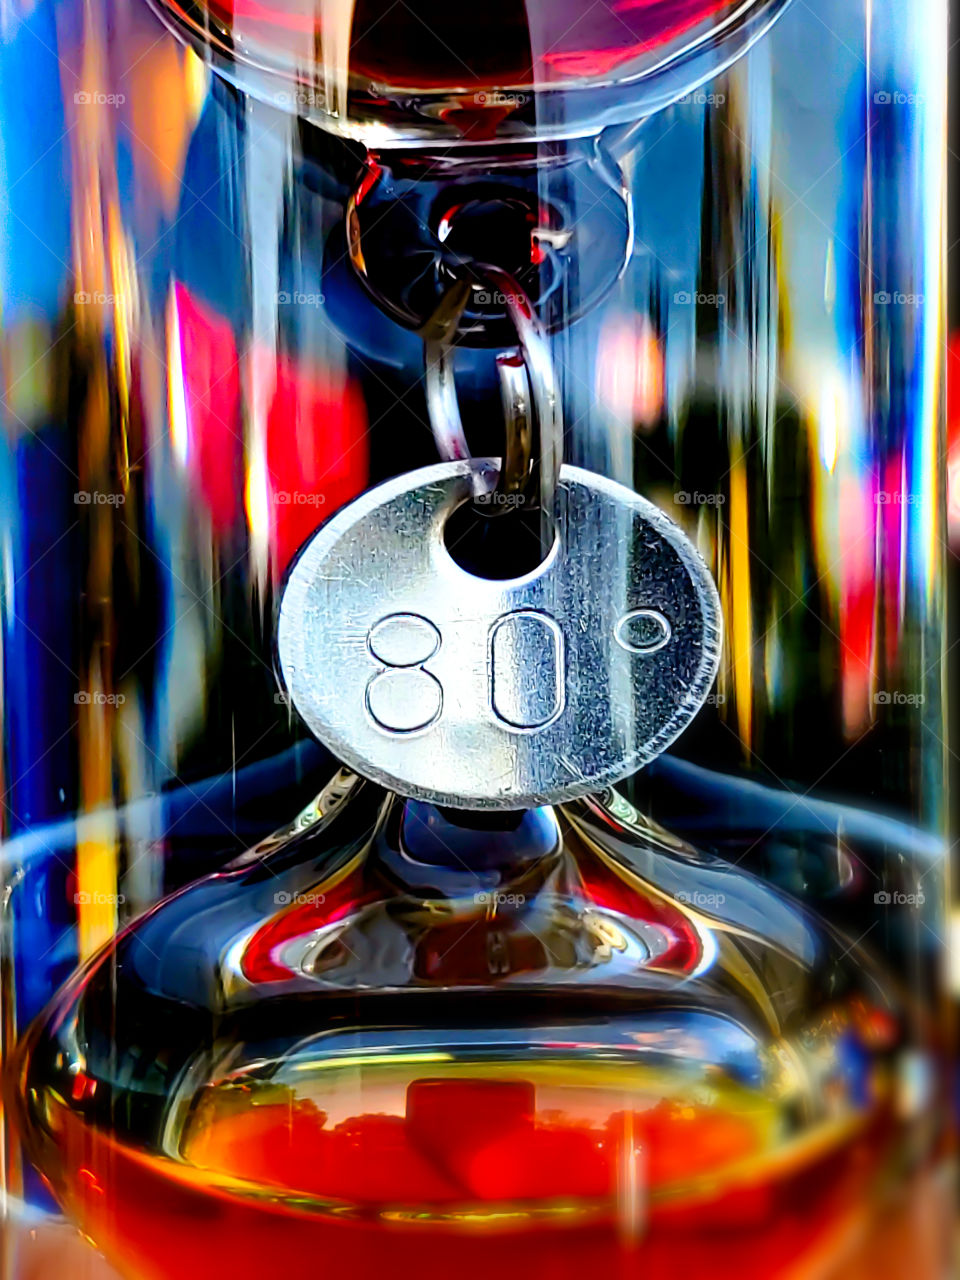 Metal temperature ring on a galileo thermometer with colors reflecting on the cylinder glass.